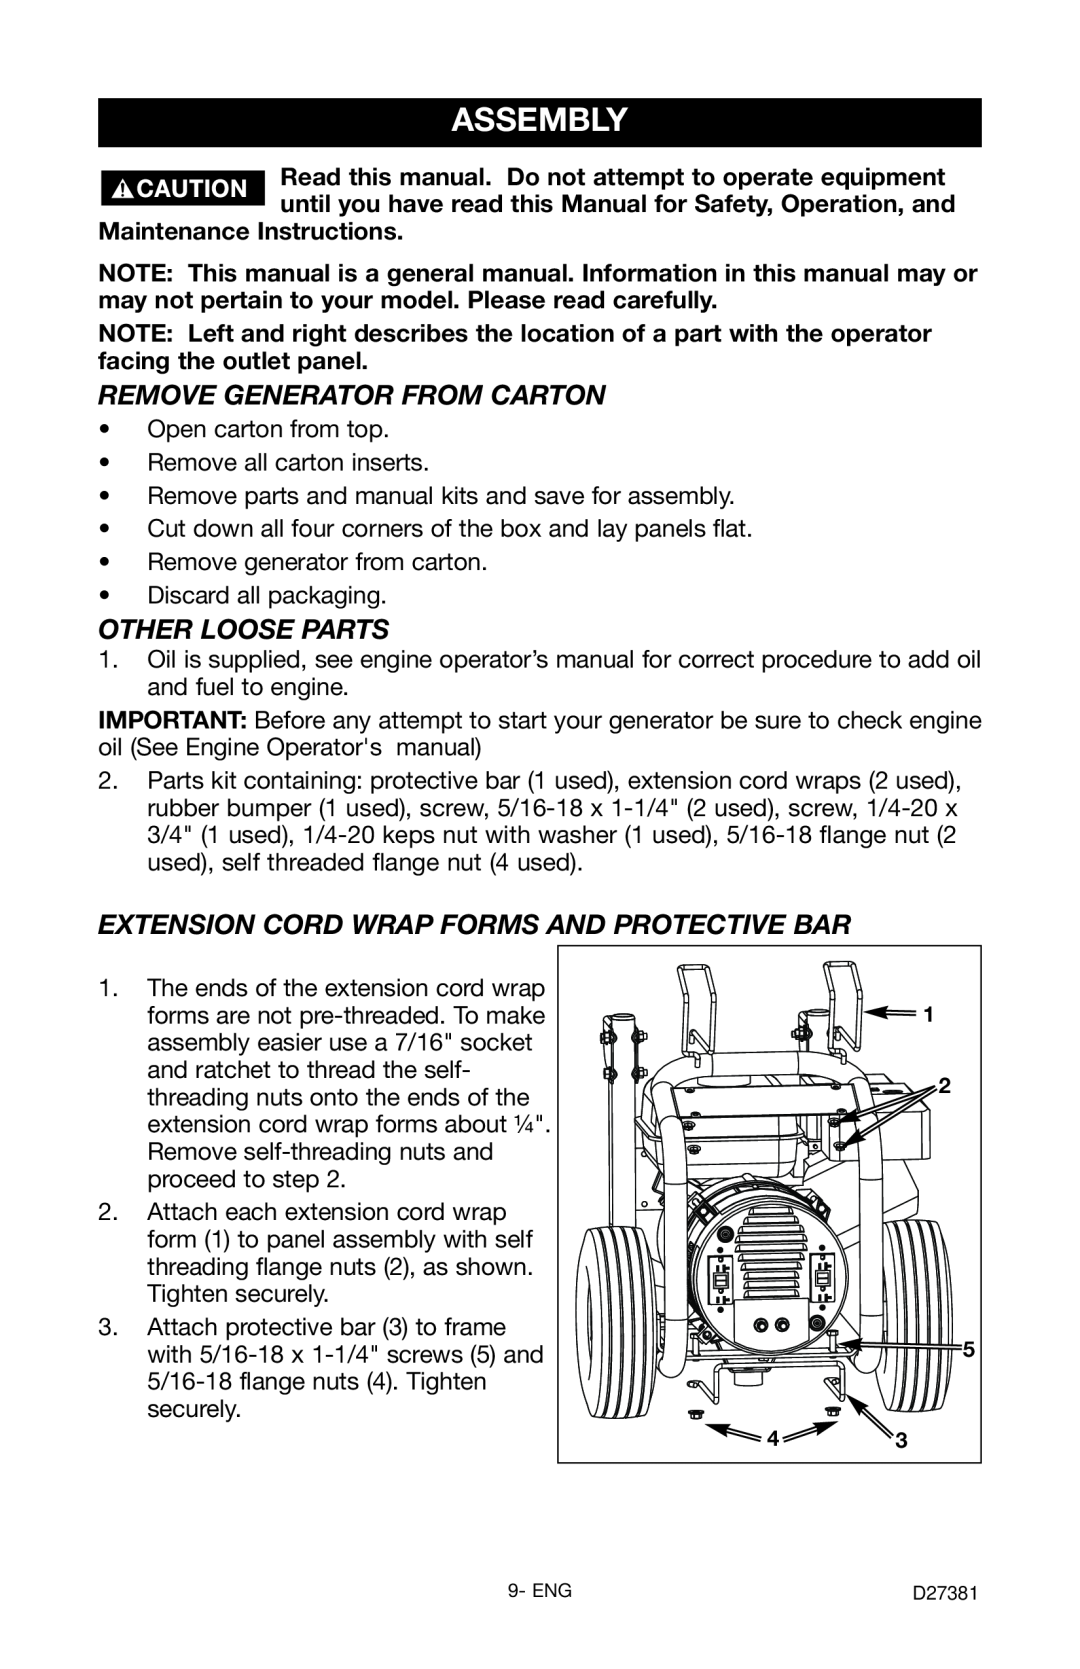 Porter-Cable PH350IS instruction manual Assembly, Remove Generator From Carton, Other Loose Parts 